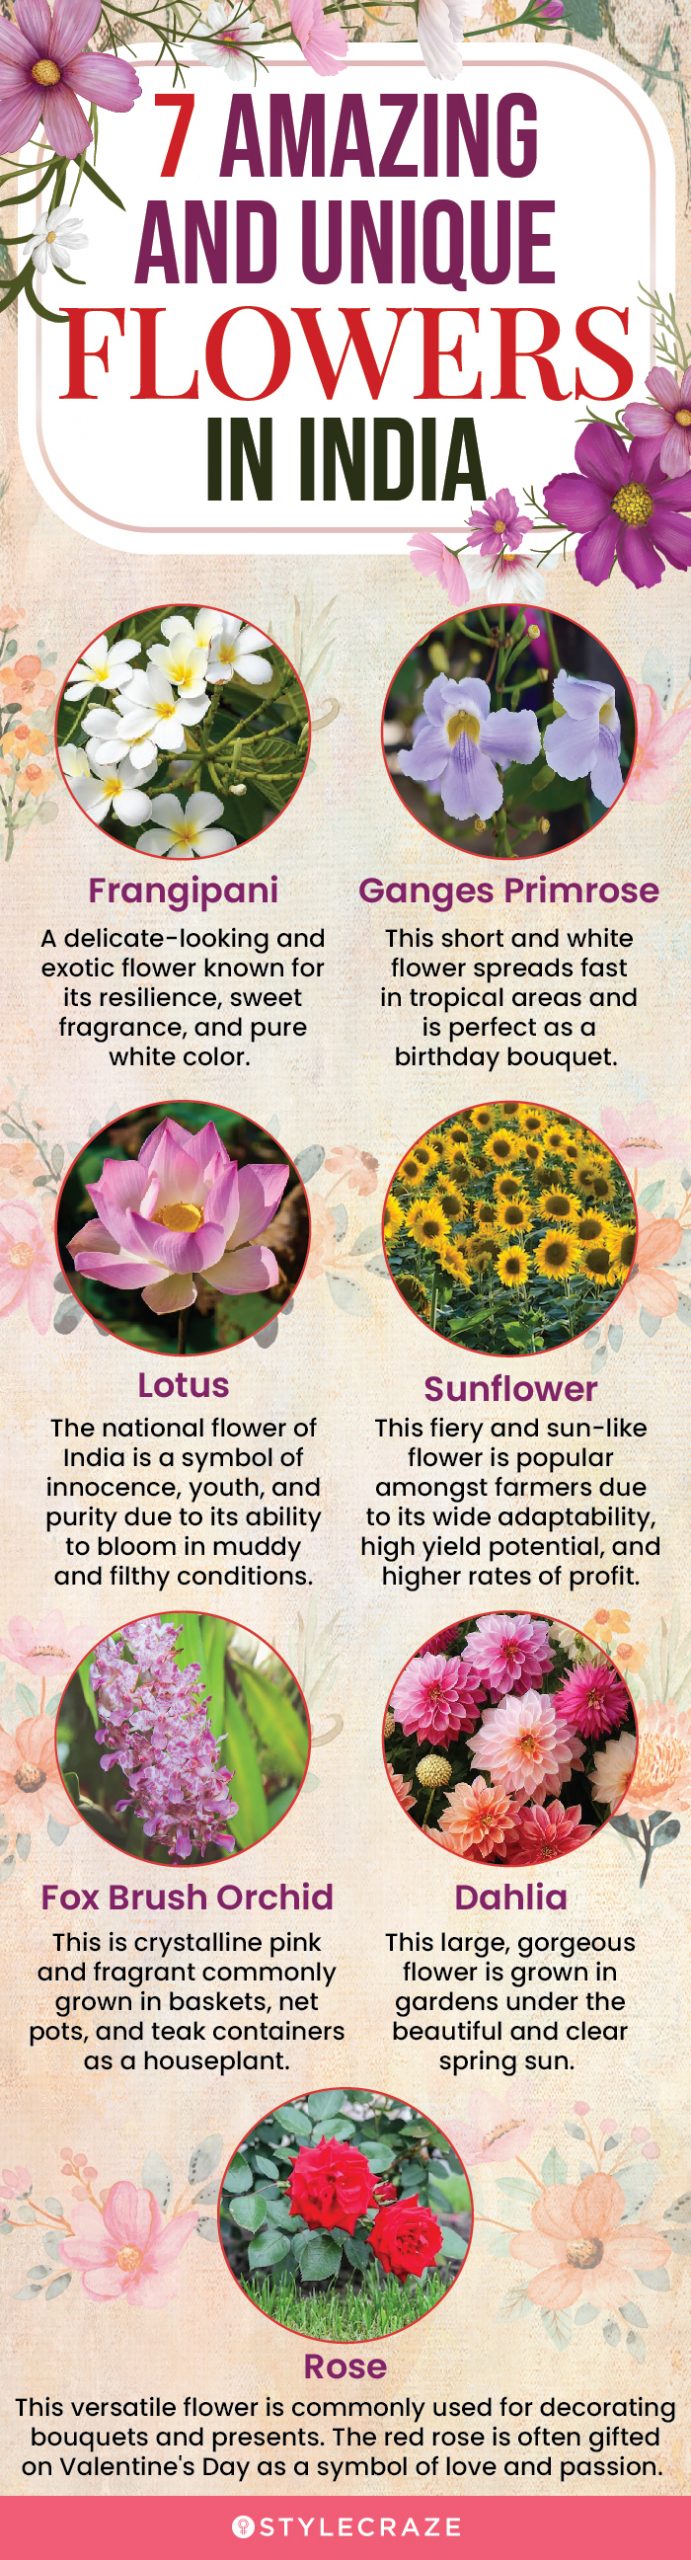 7 amazing and unique flowers in india (infographic)